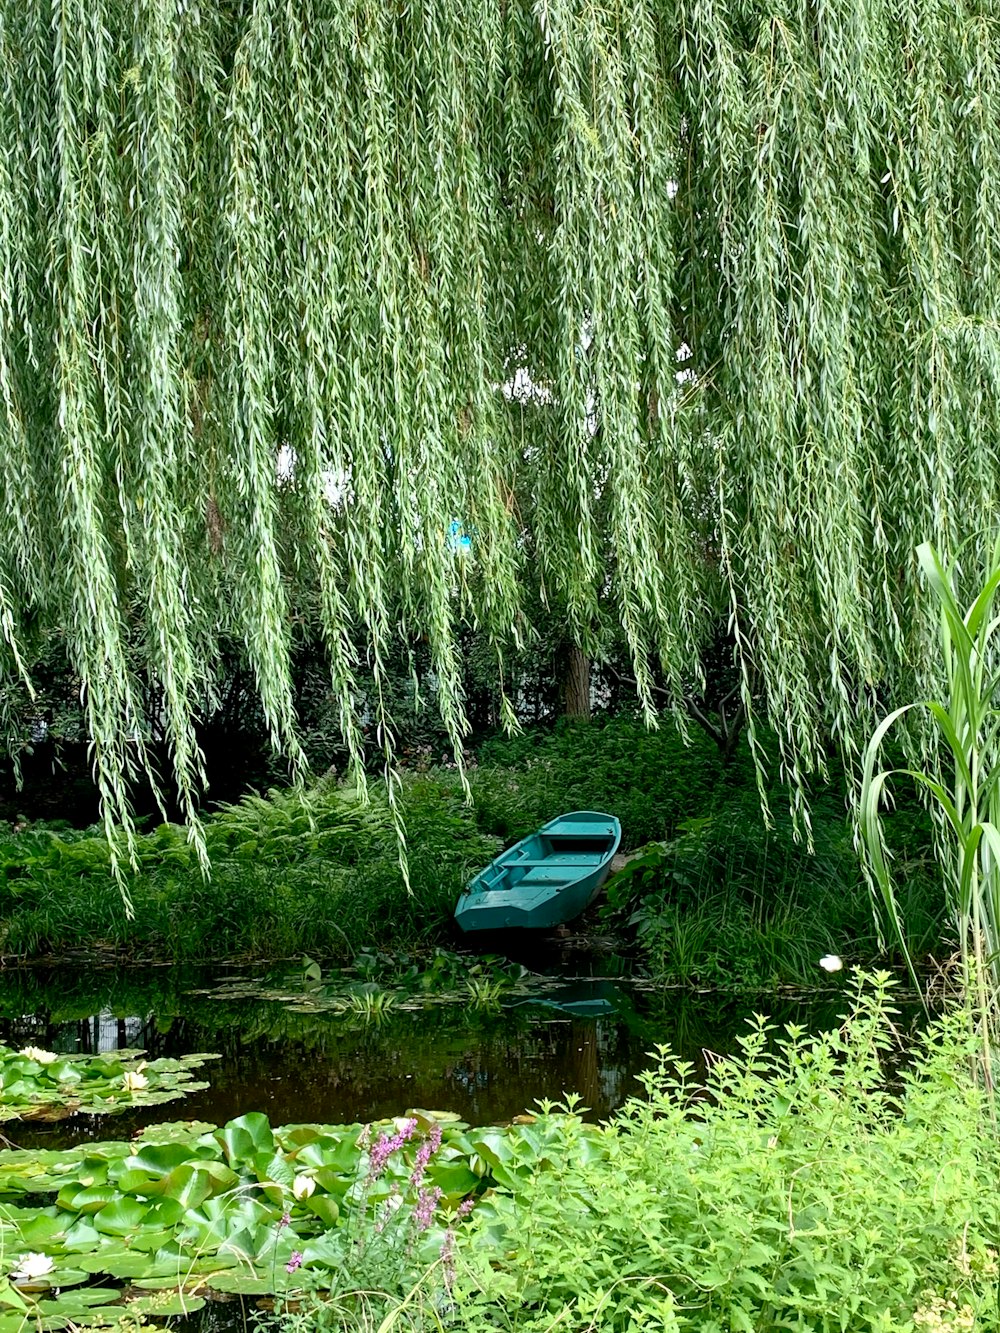 a boat is sitting in the water under a willow tree